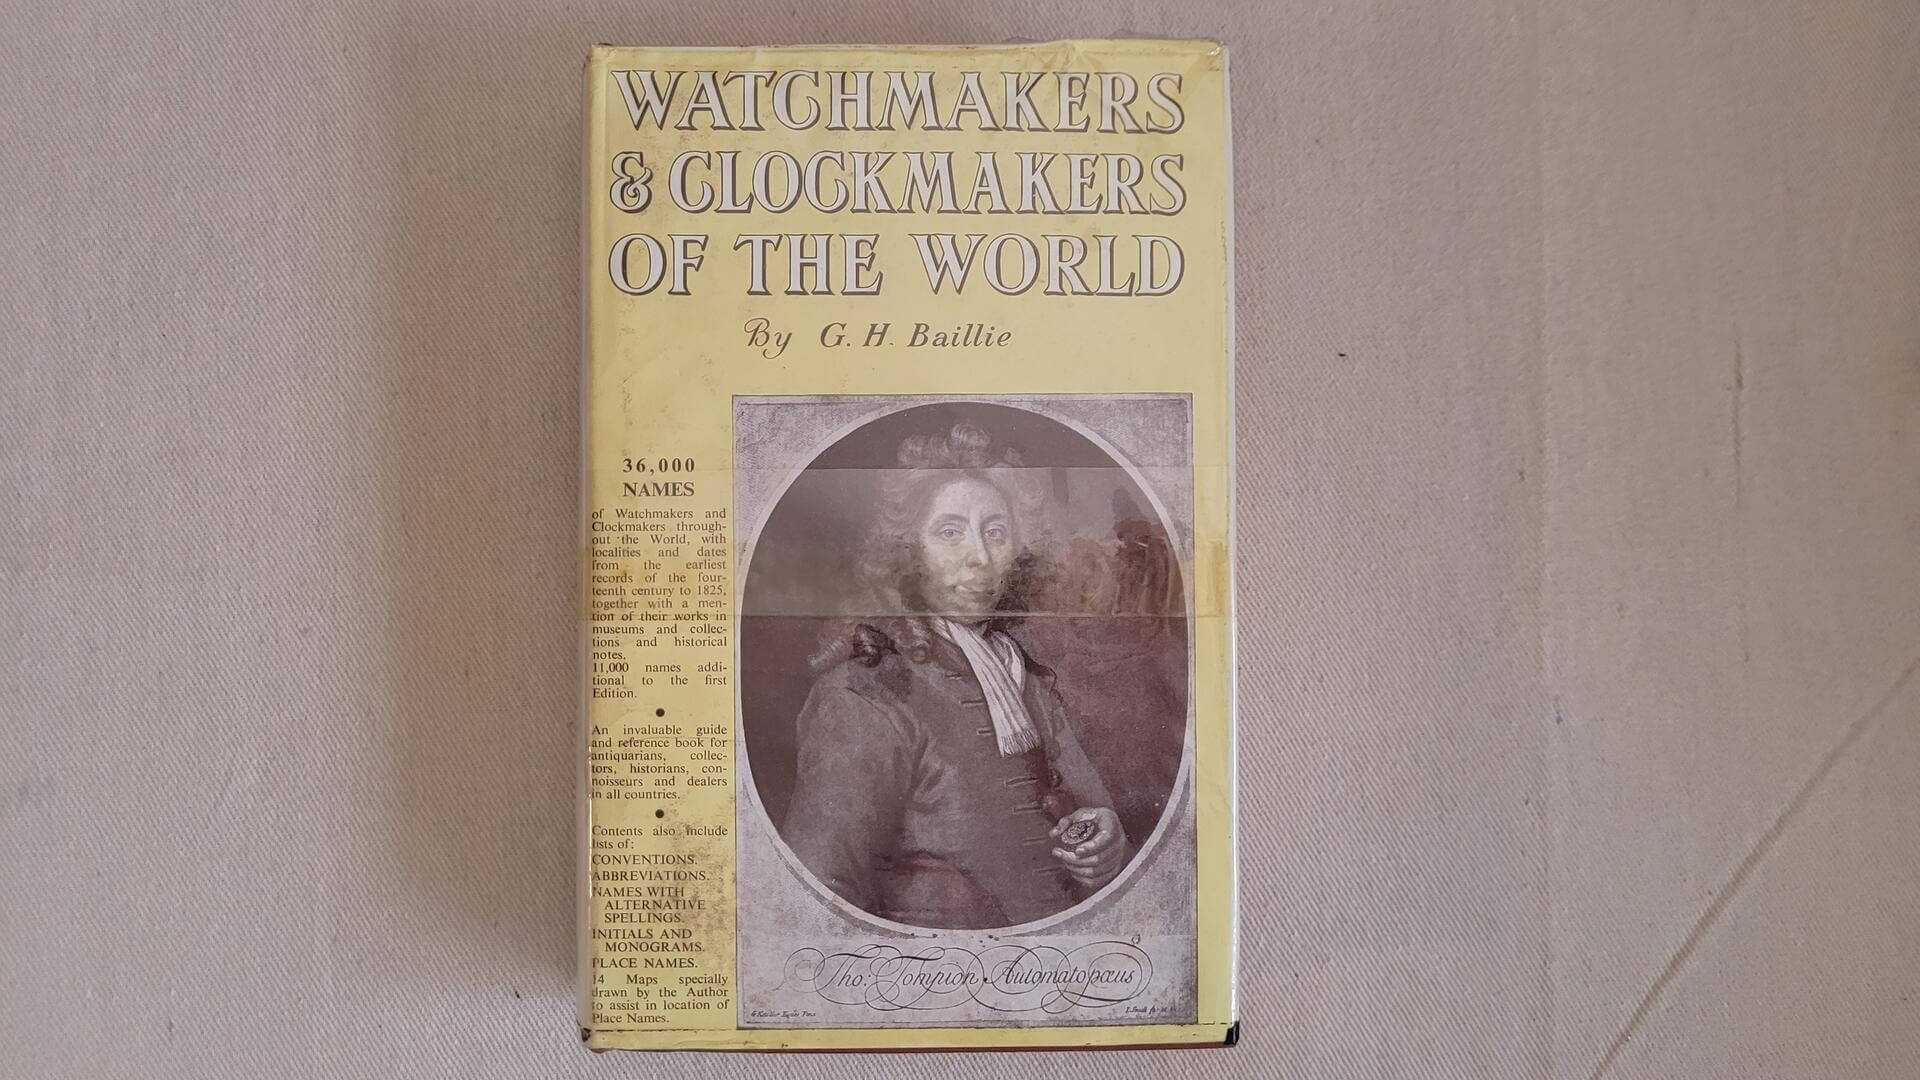 "Watchmakers and Clockmakers of the World" is a comprehensive reference book of the most notable makers of clocks and watches in the world with 36000 names